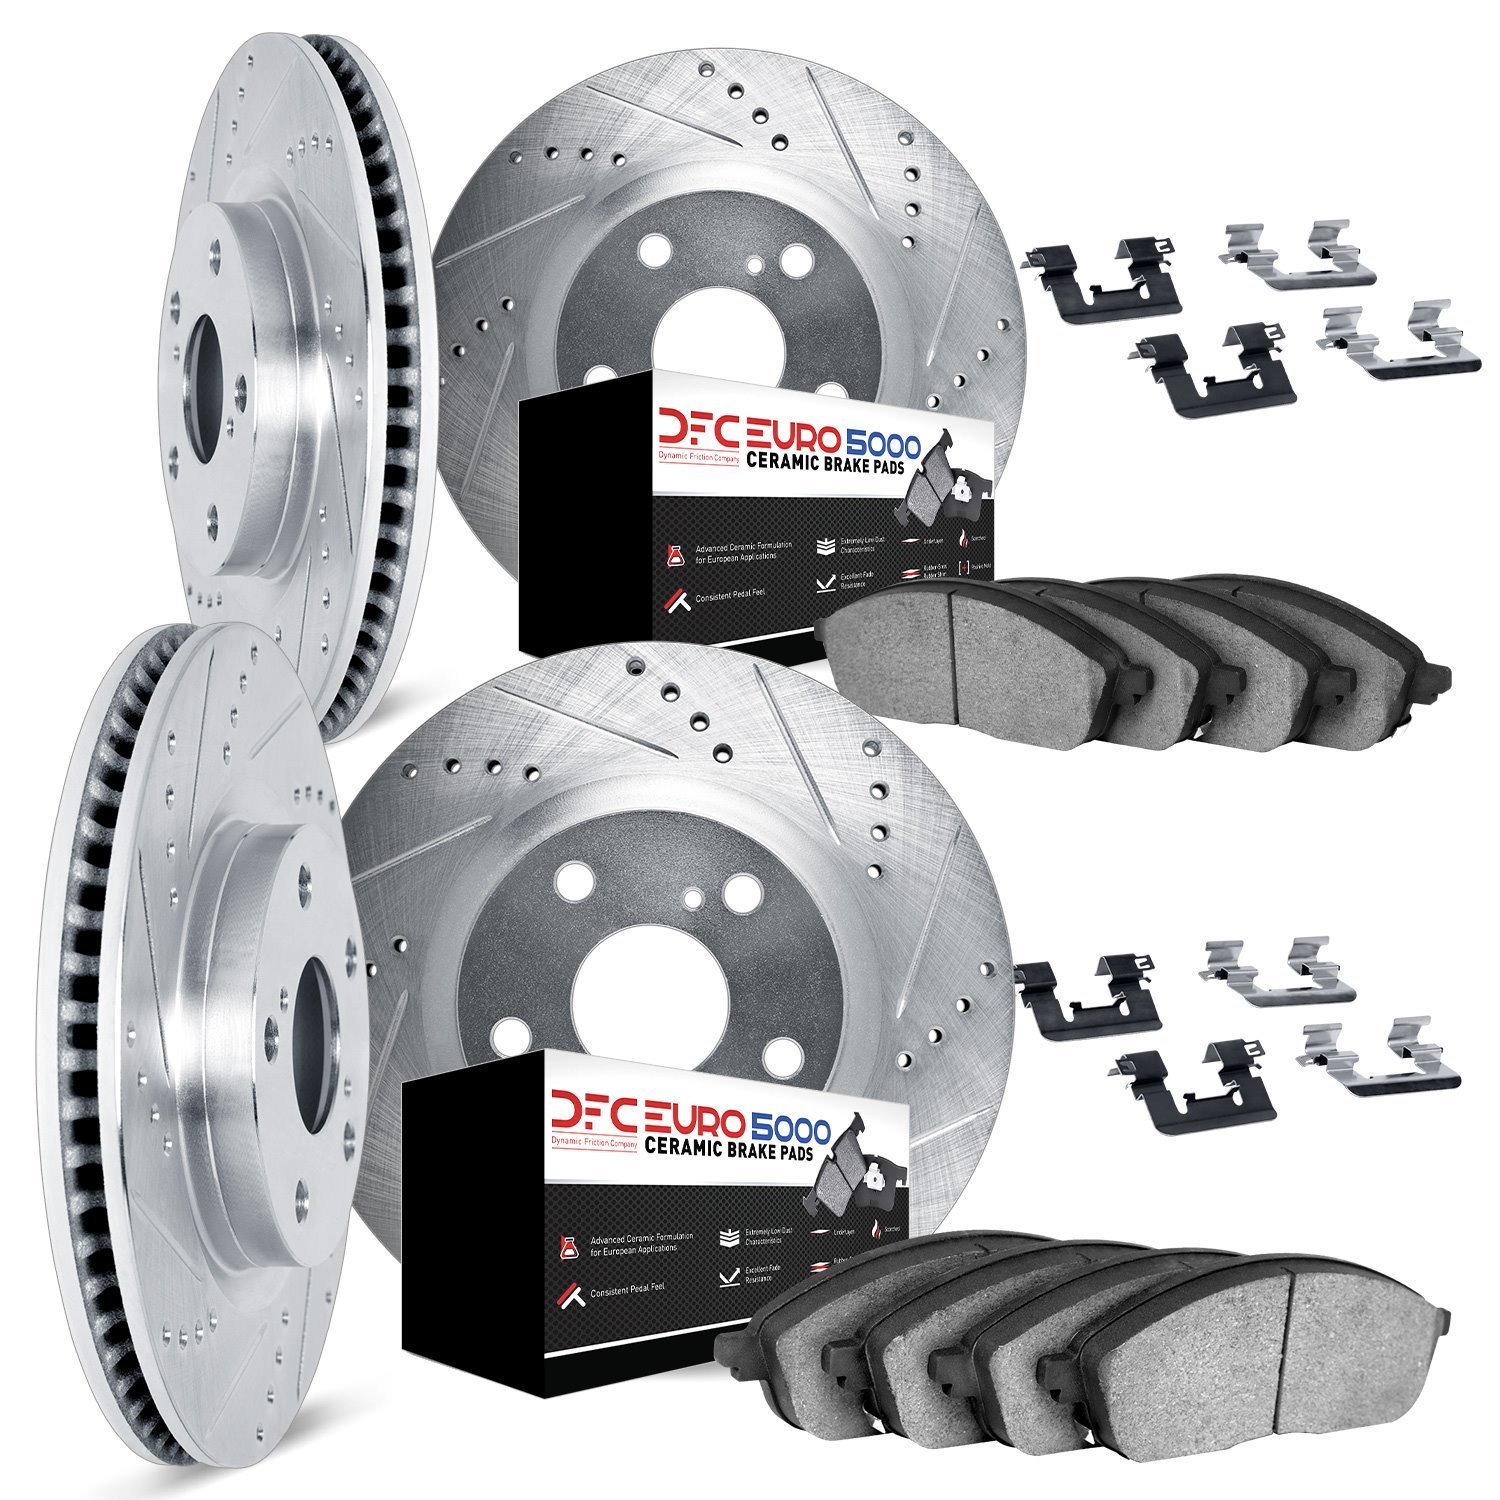 7614-31028 Drilled/Slotted Brake Rotors w/5000 Euro Ceramic Brake Pads Kit & Hardware [Silver], 2010-2017 BMW, Position: Front a